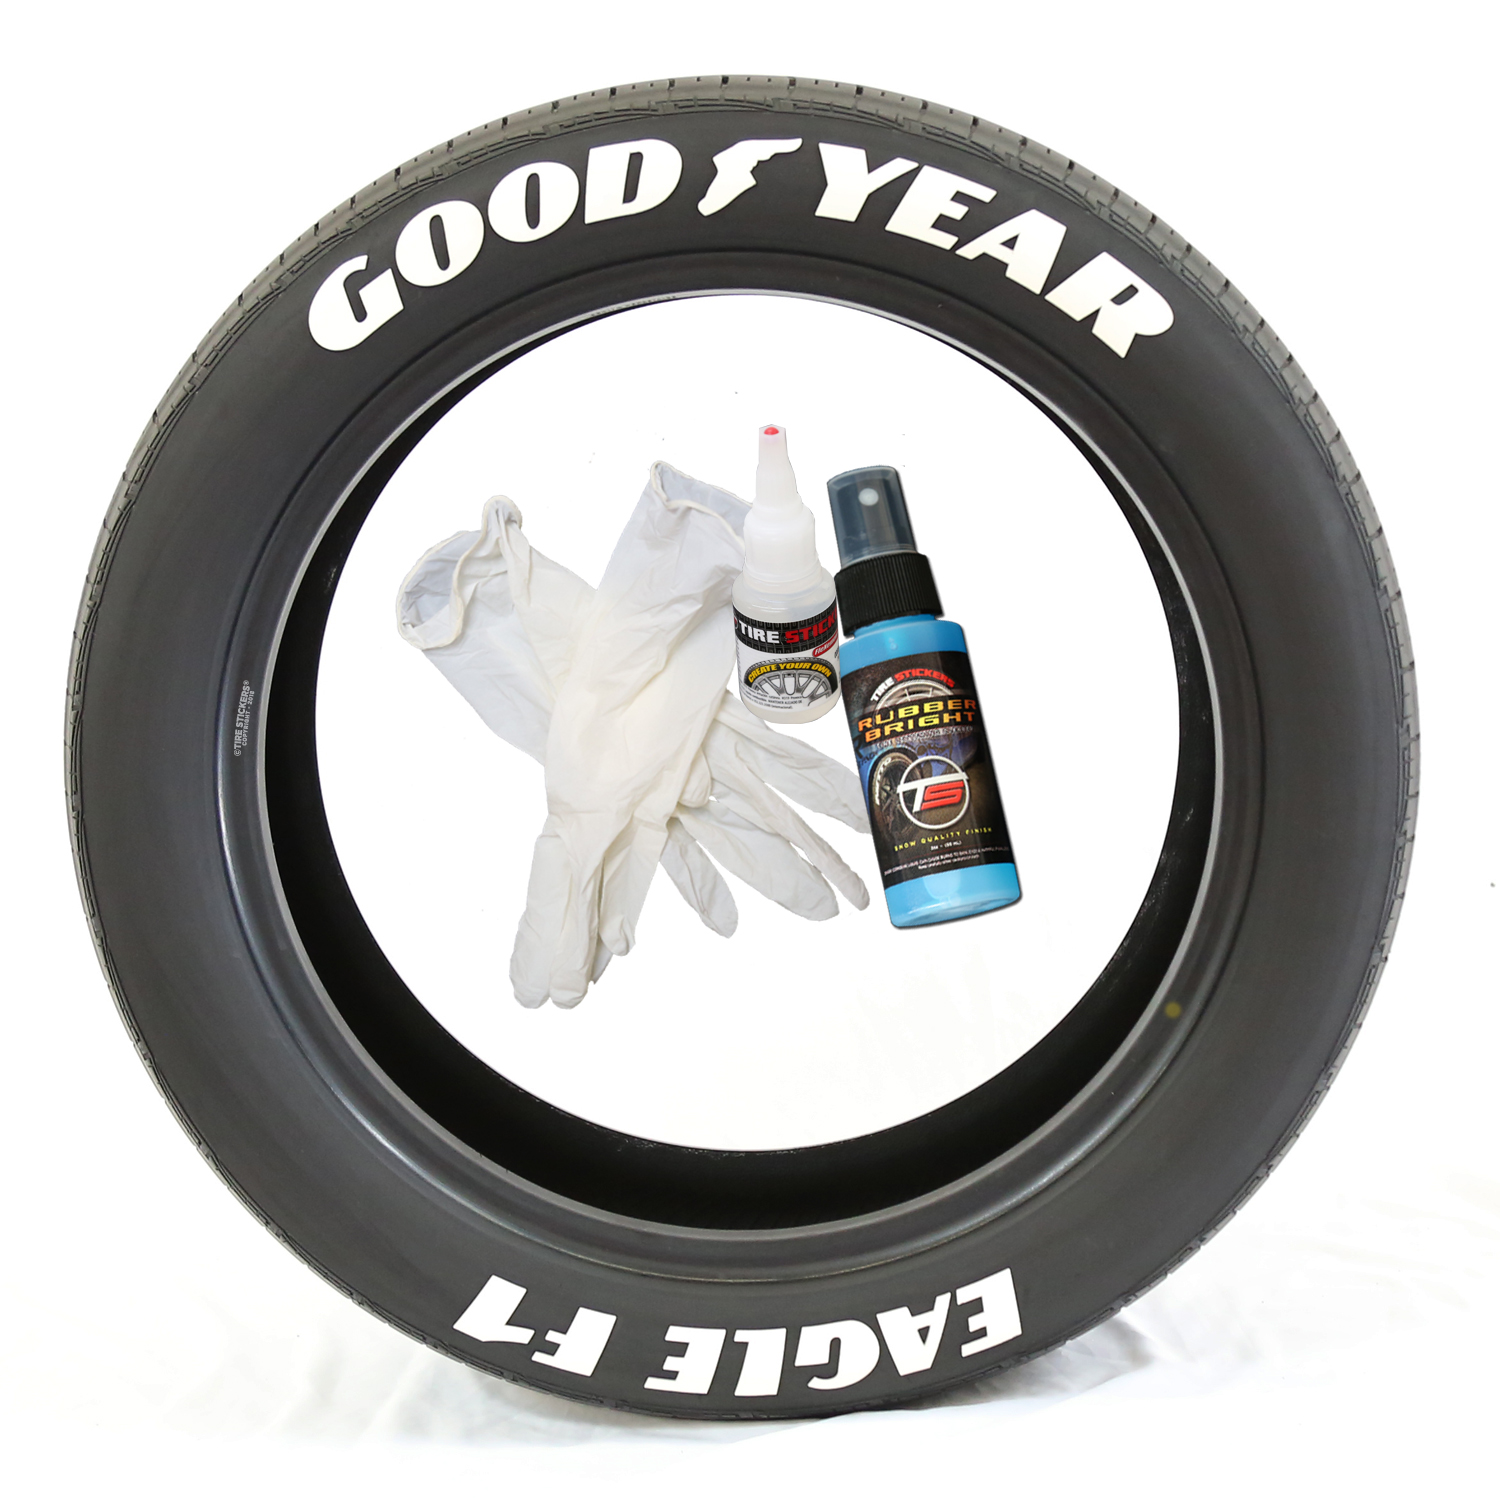 1/64 'Goodyear Eagle Tires'' Decal SCR-0716 